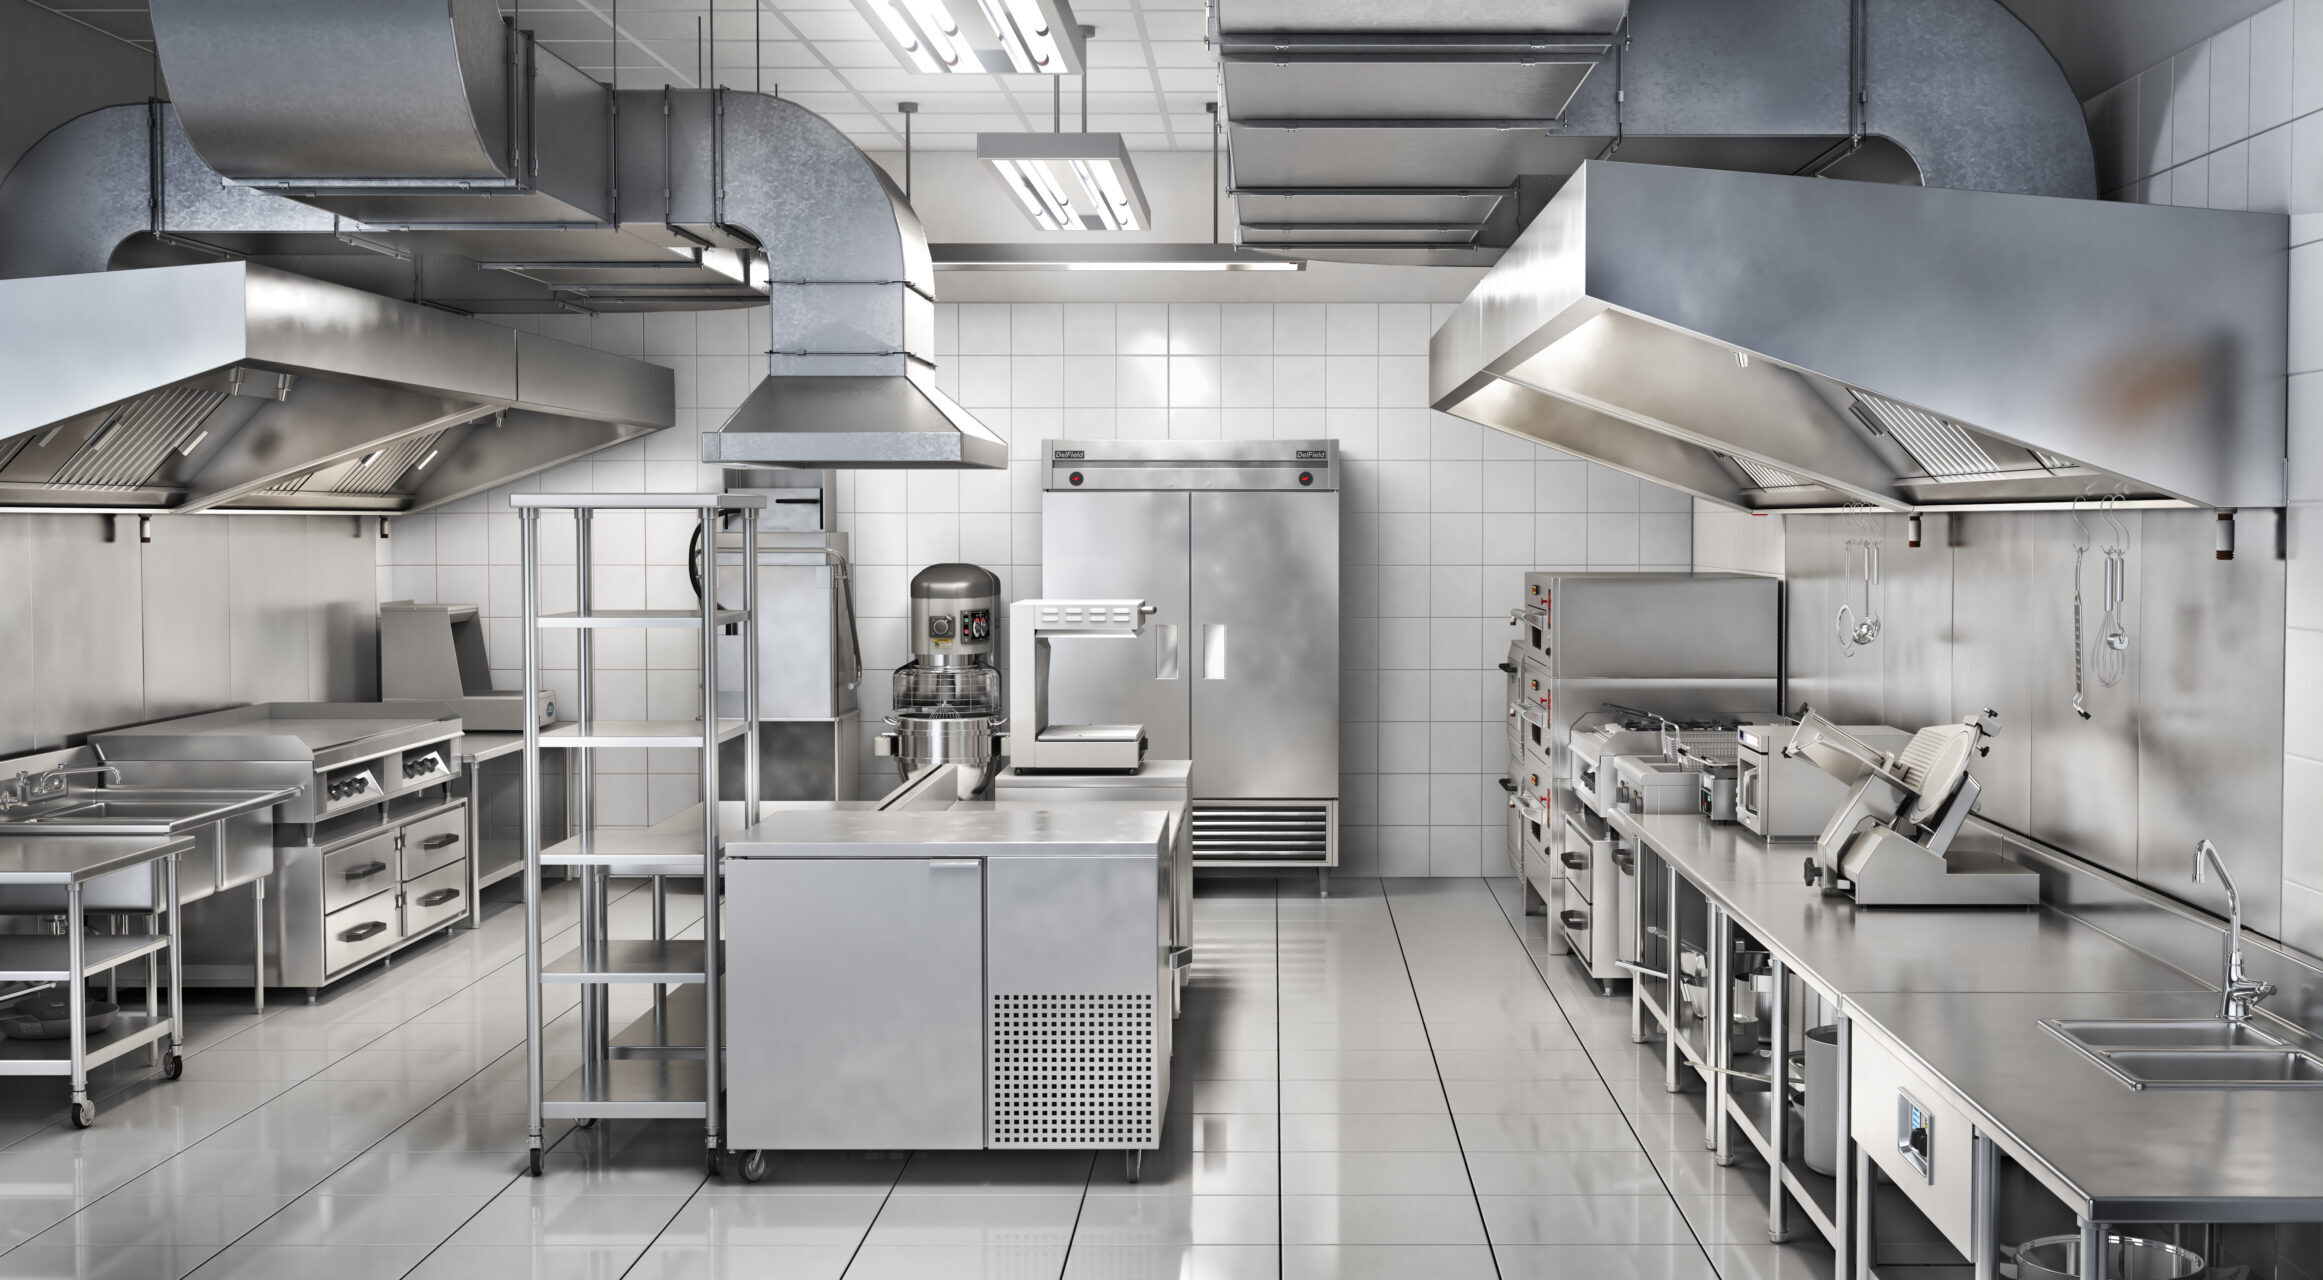 500 square foot commercial kitchen design